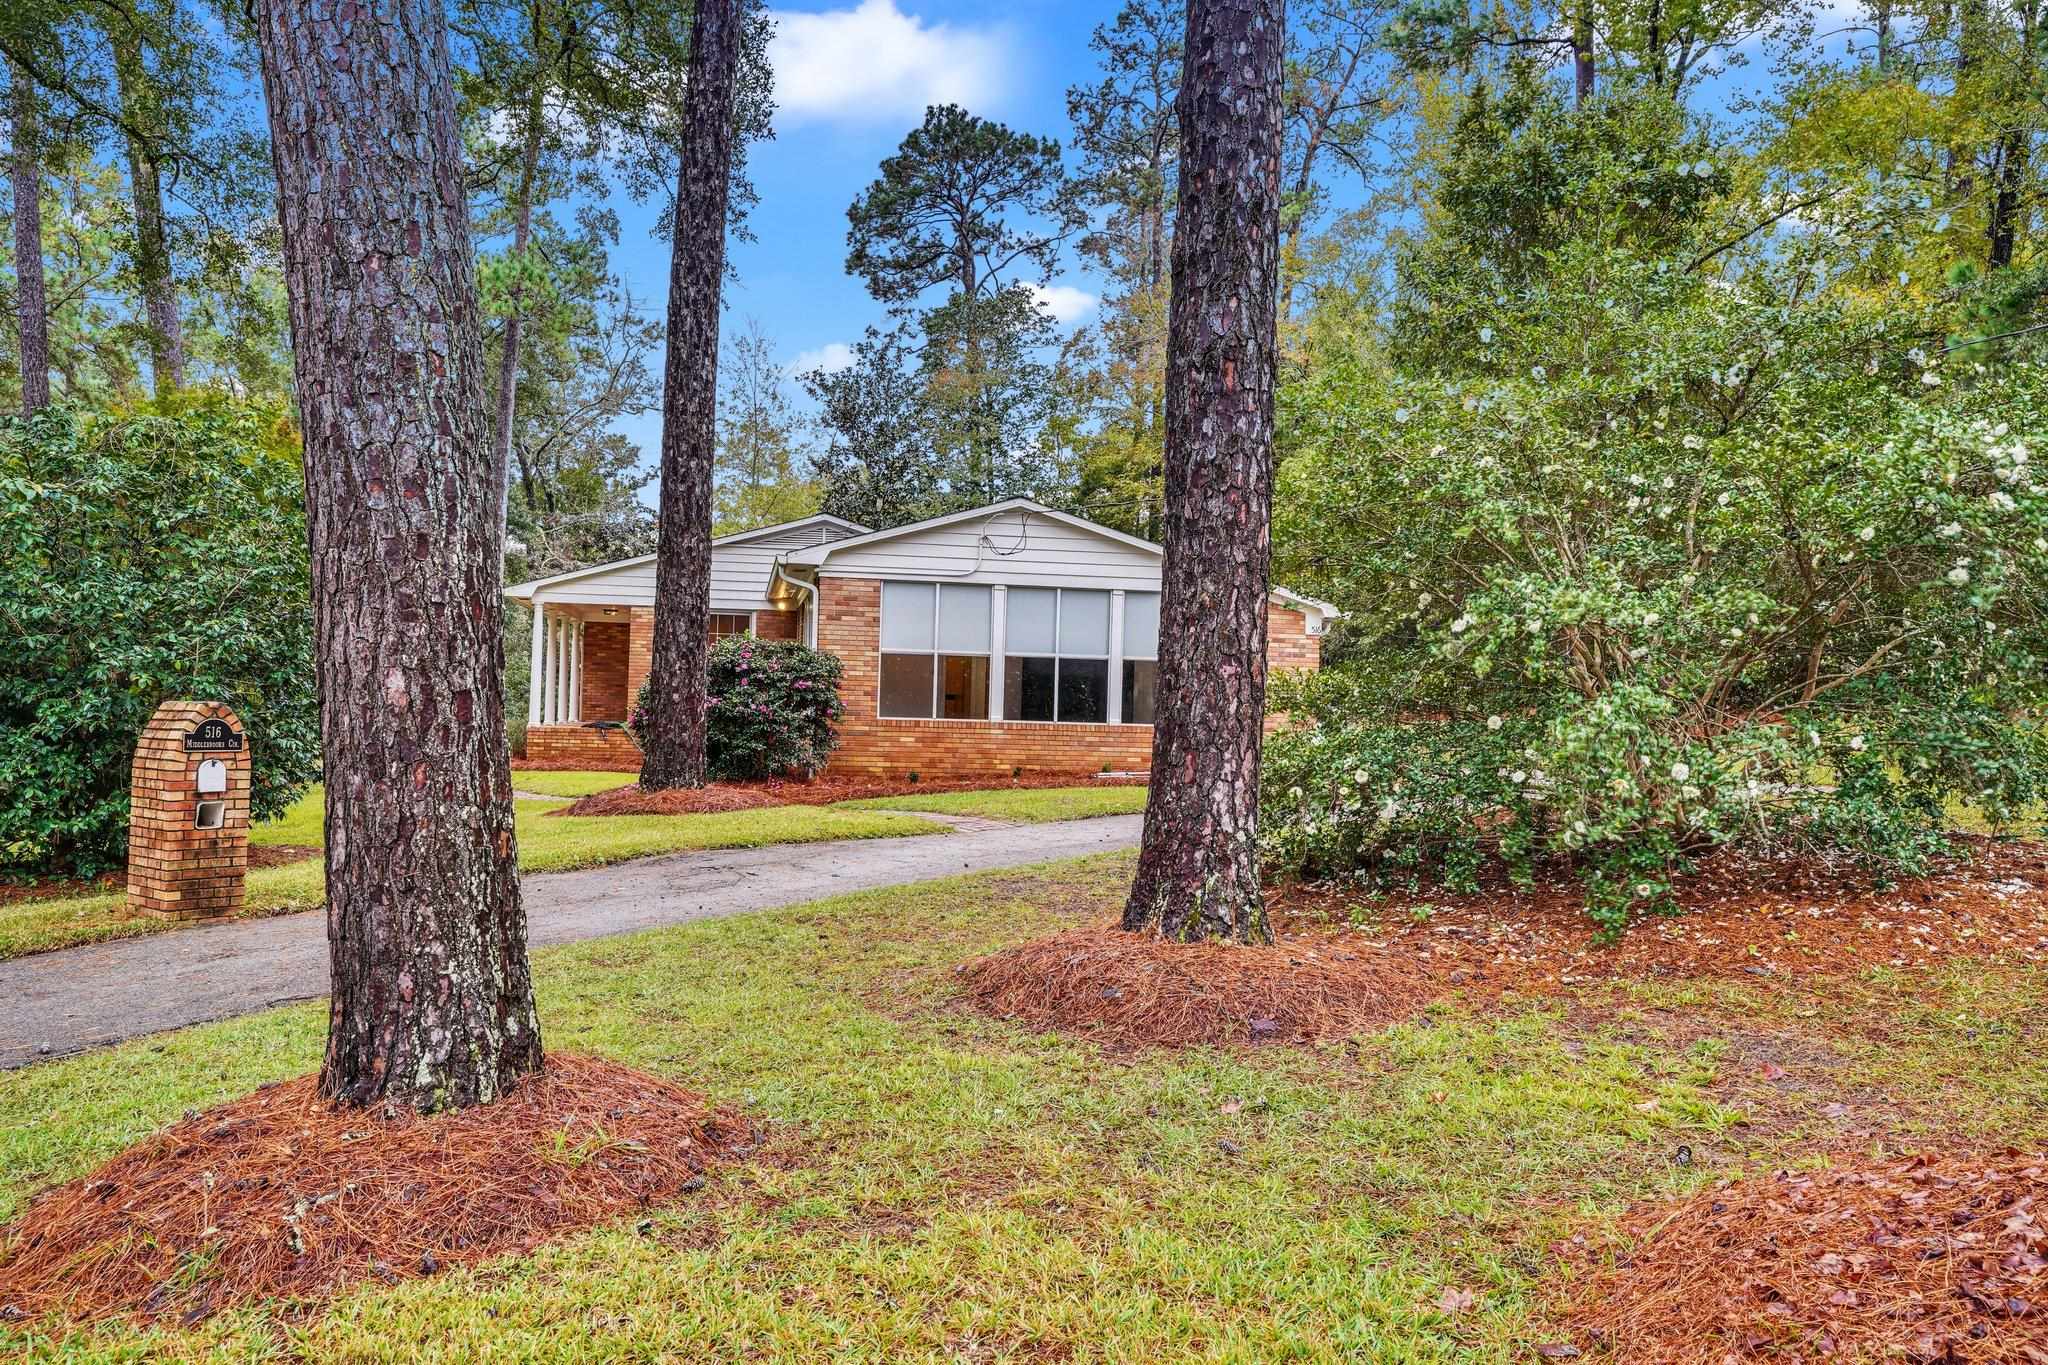 516 Middlebrooks Circle,TALLAHASSEE,Florida 32312,3 Bedrooms Bedrooms,2 BathroomsBathrooms,Detached single family,516 Middlebrooks Circle,369308